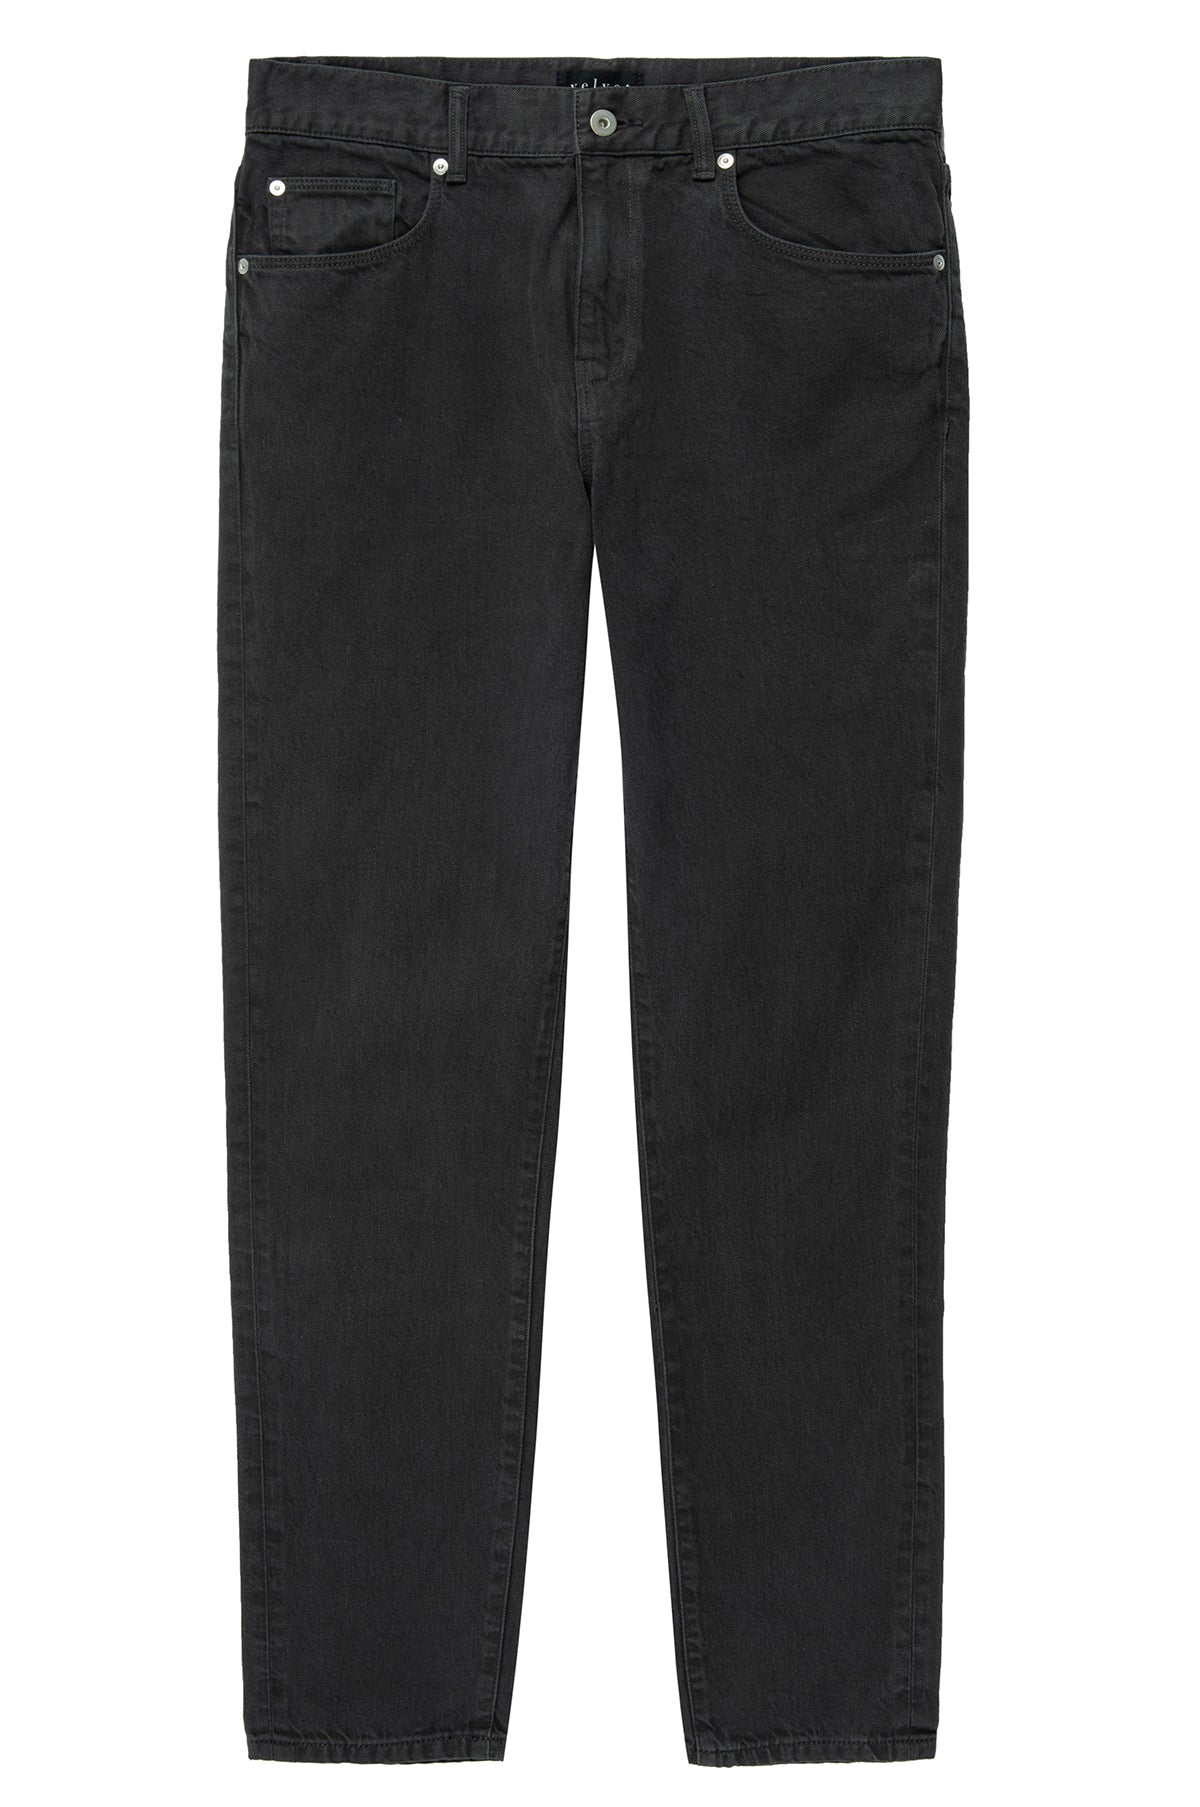 a pair of Velvet by Graham & Spencer JOSEPH COTTON CANVAS PANT with buttons and pockets.-26022595952833